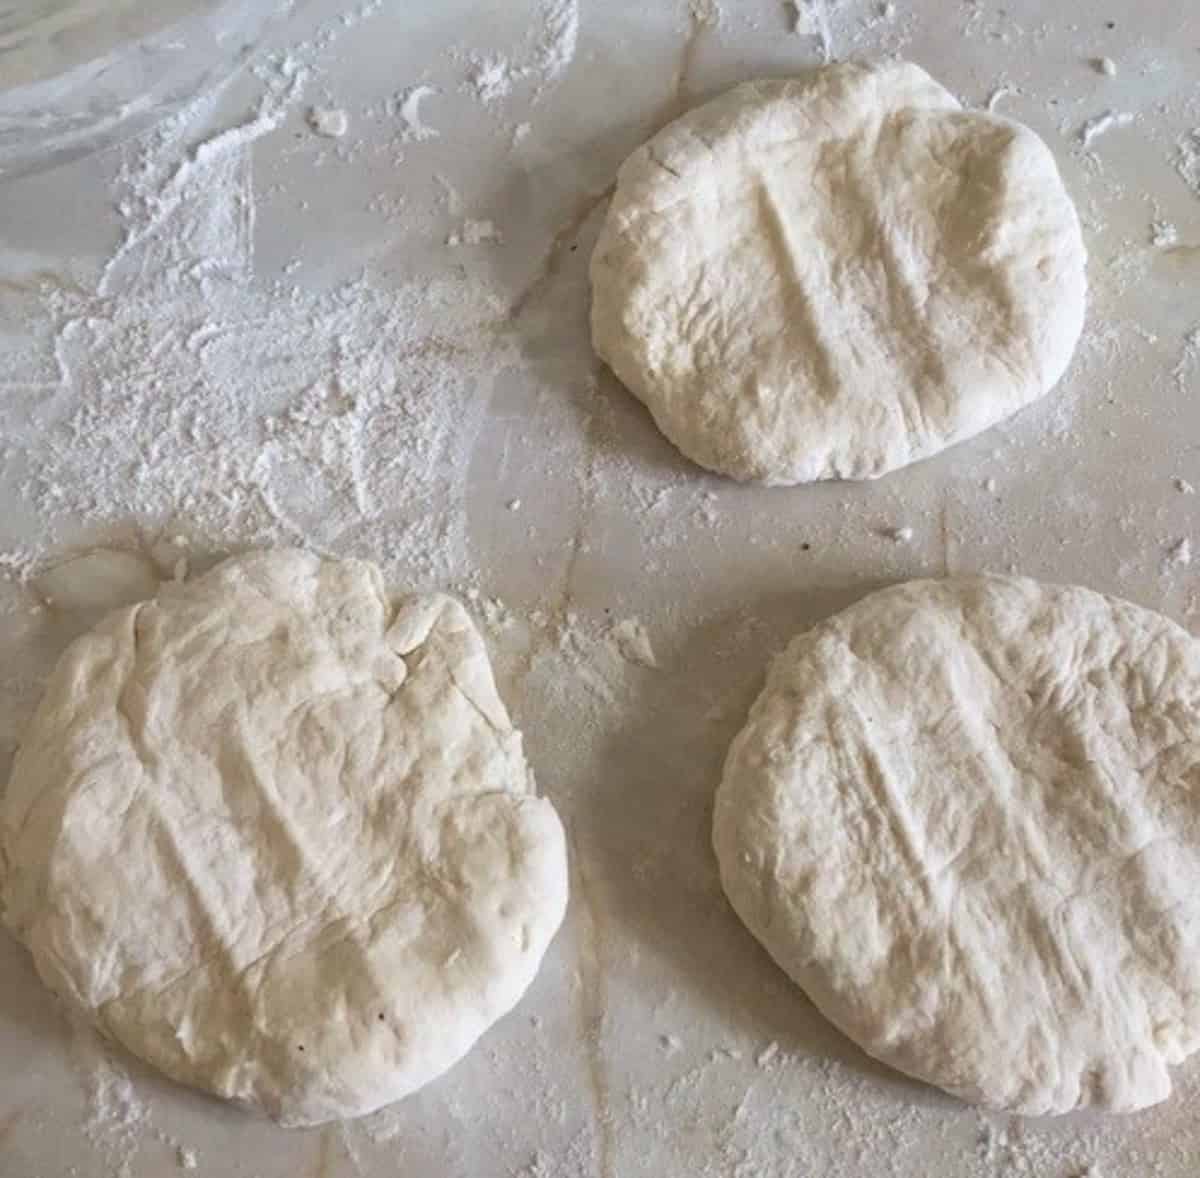 Homemade flatbread dough to serve with broad bean dip